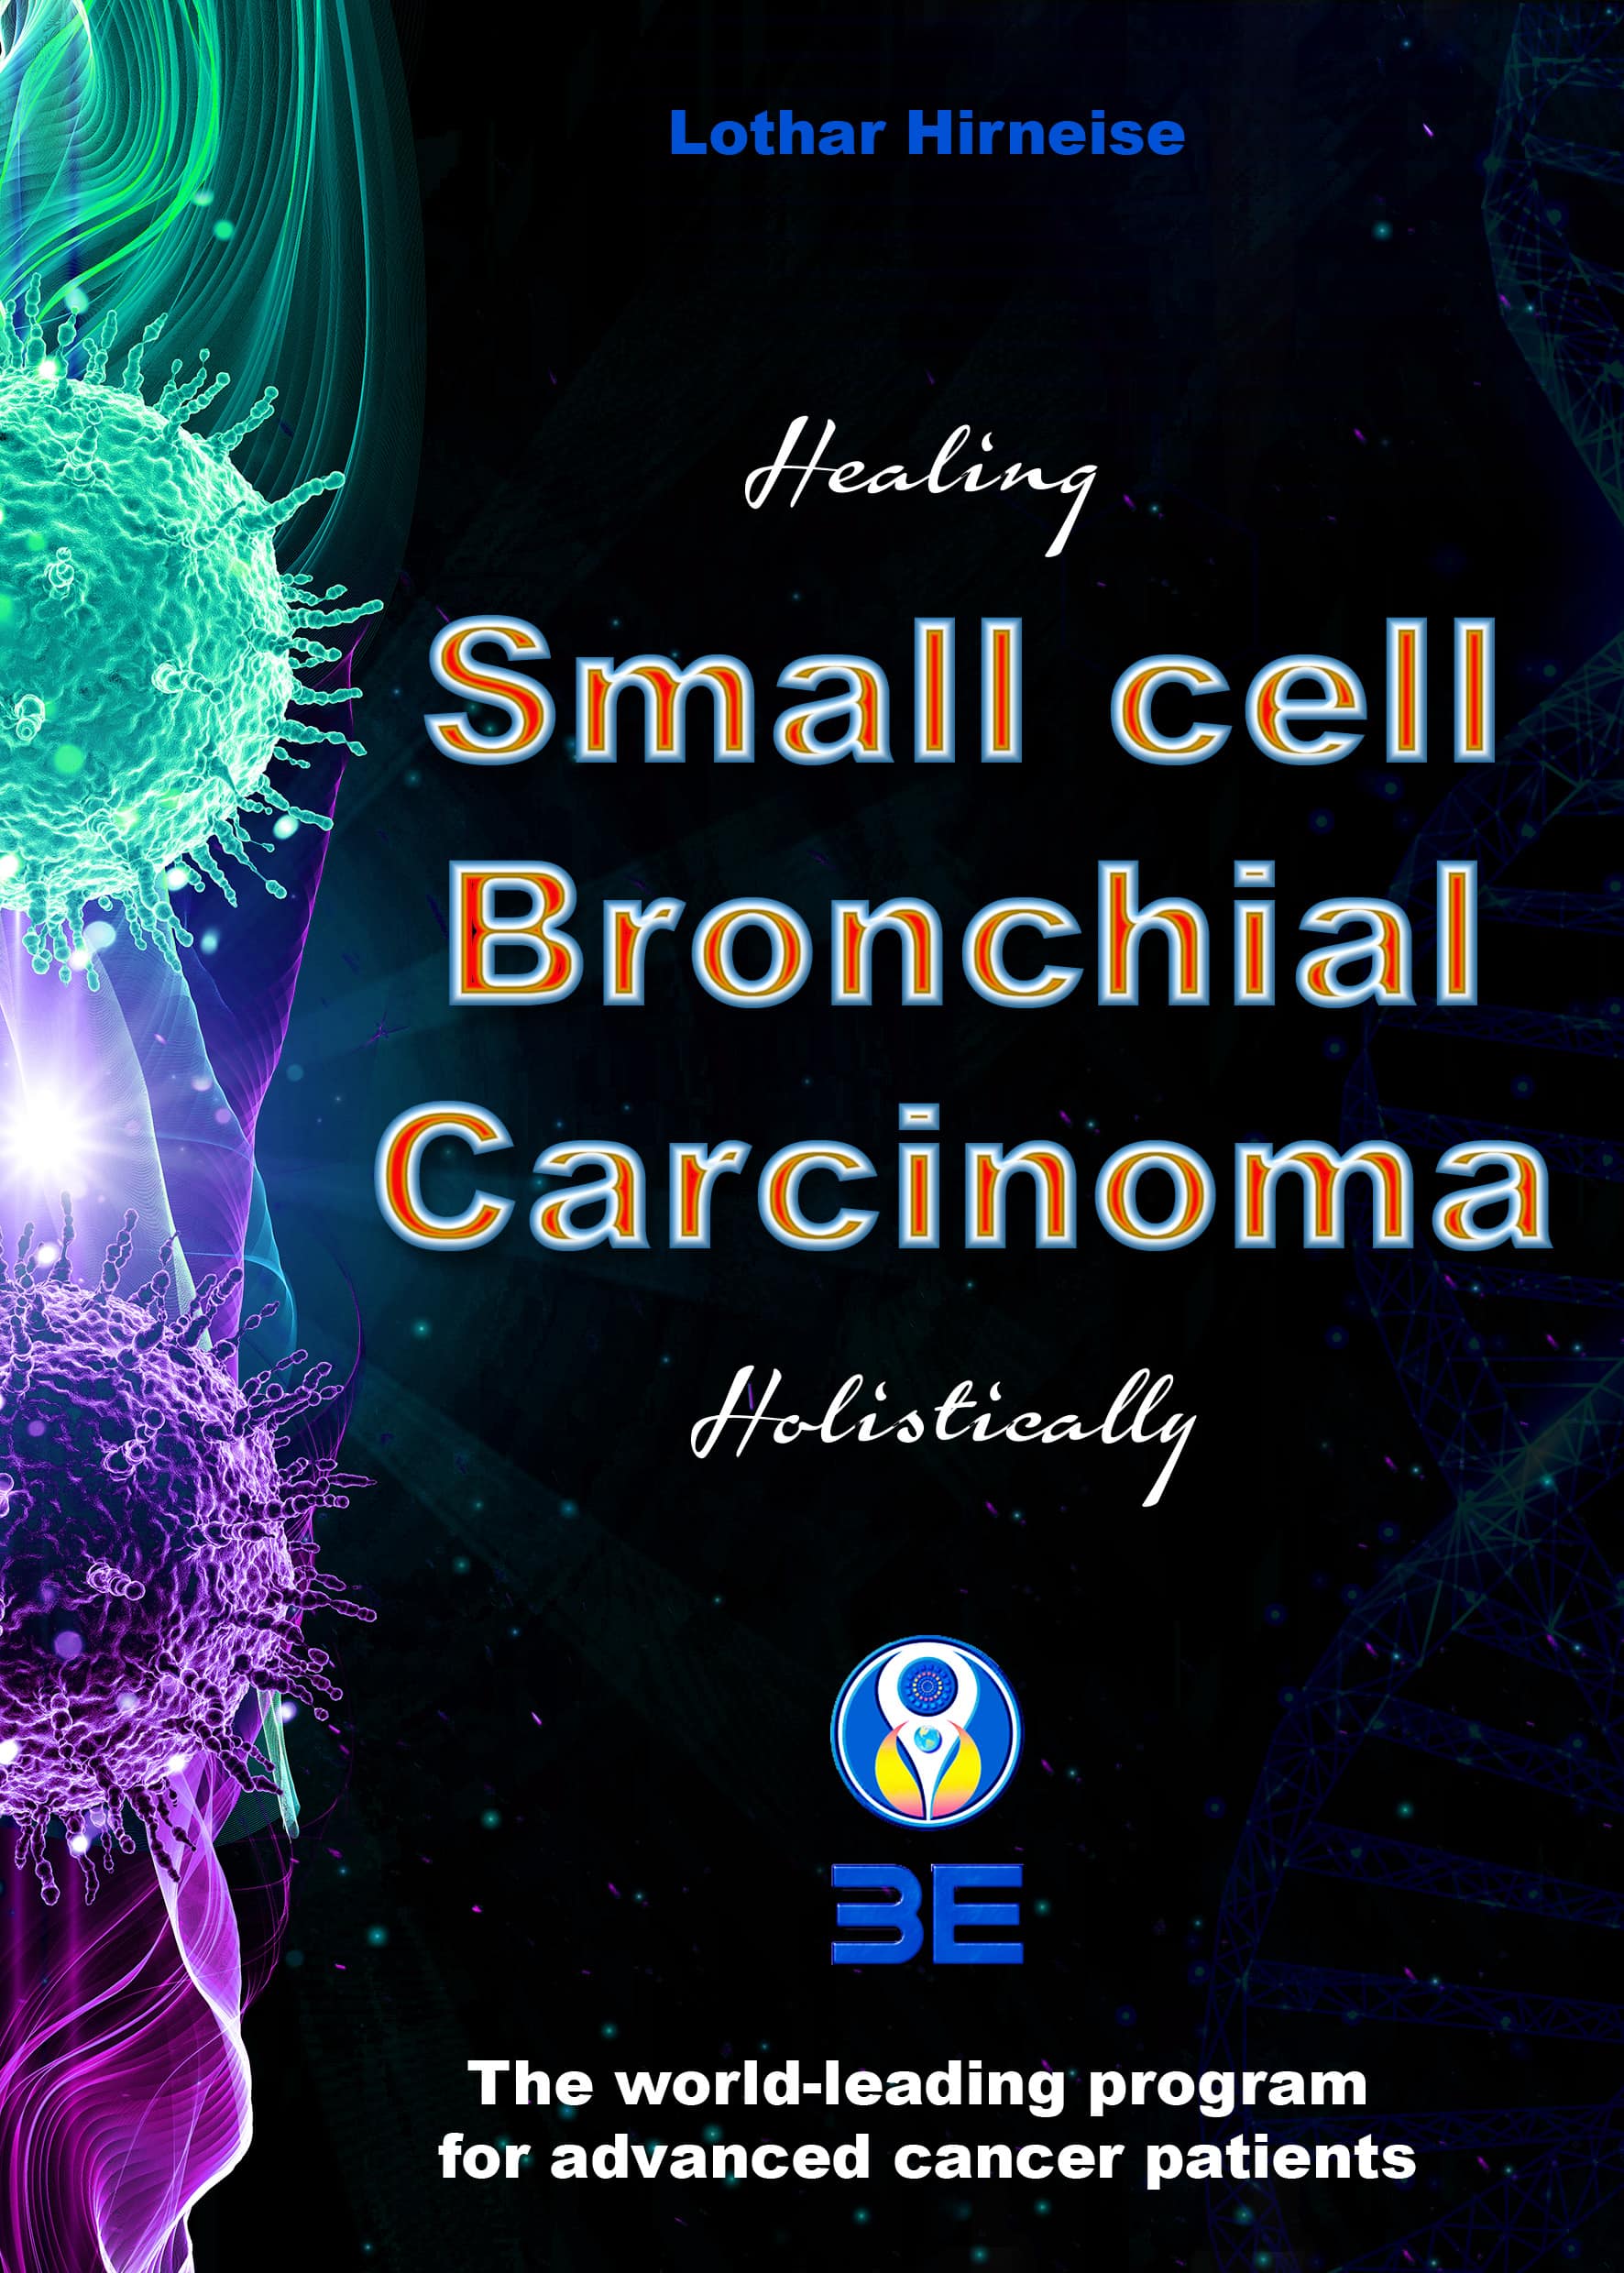 Small cell bronchial carcinoma